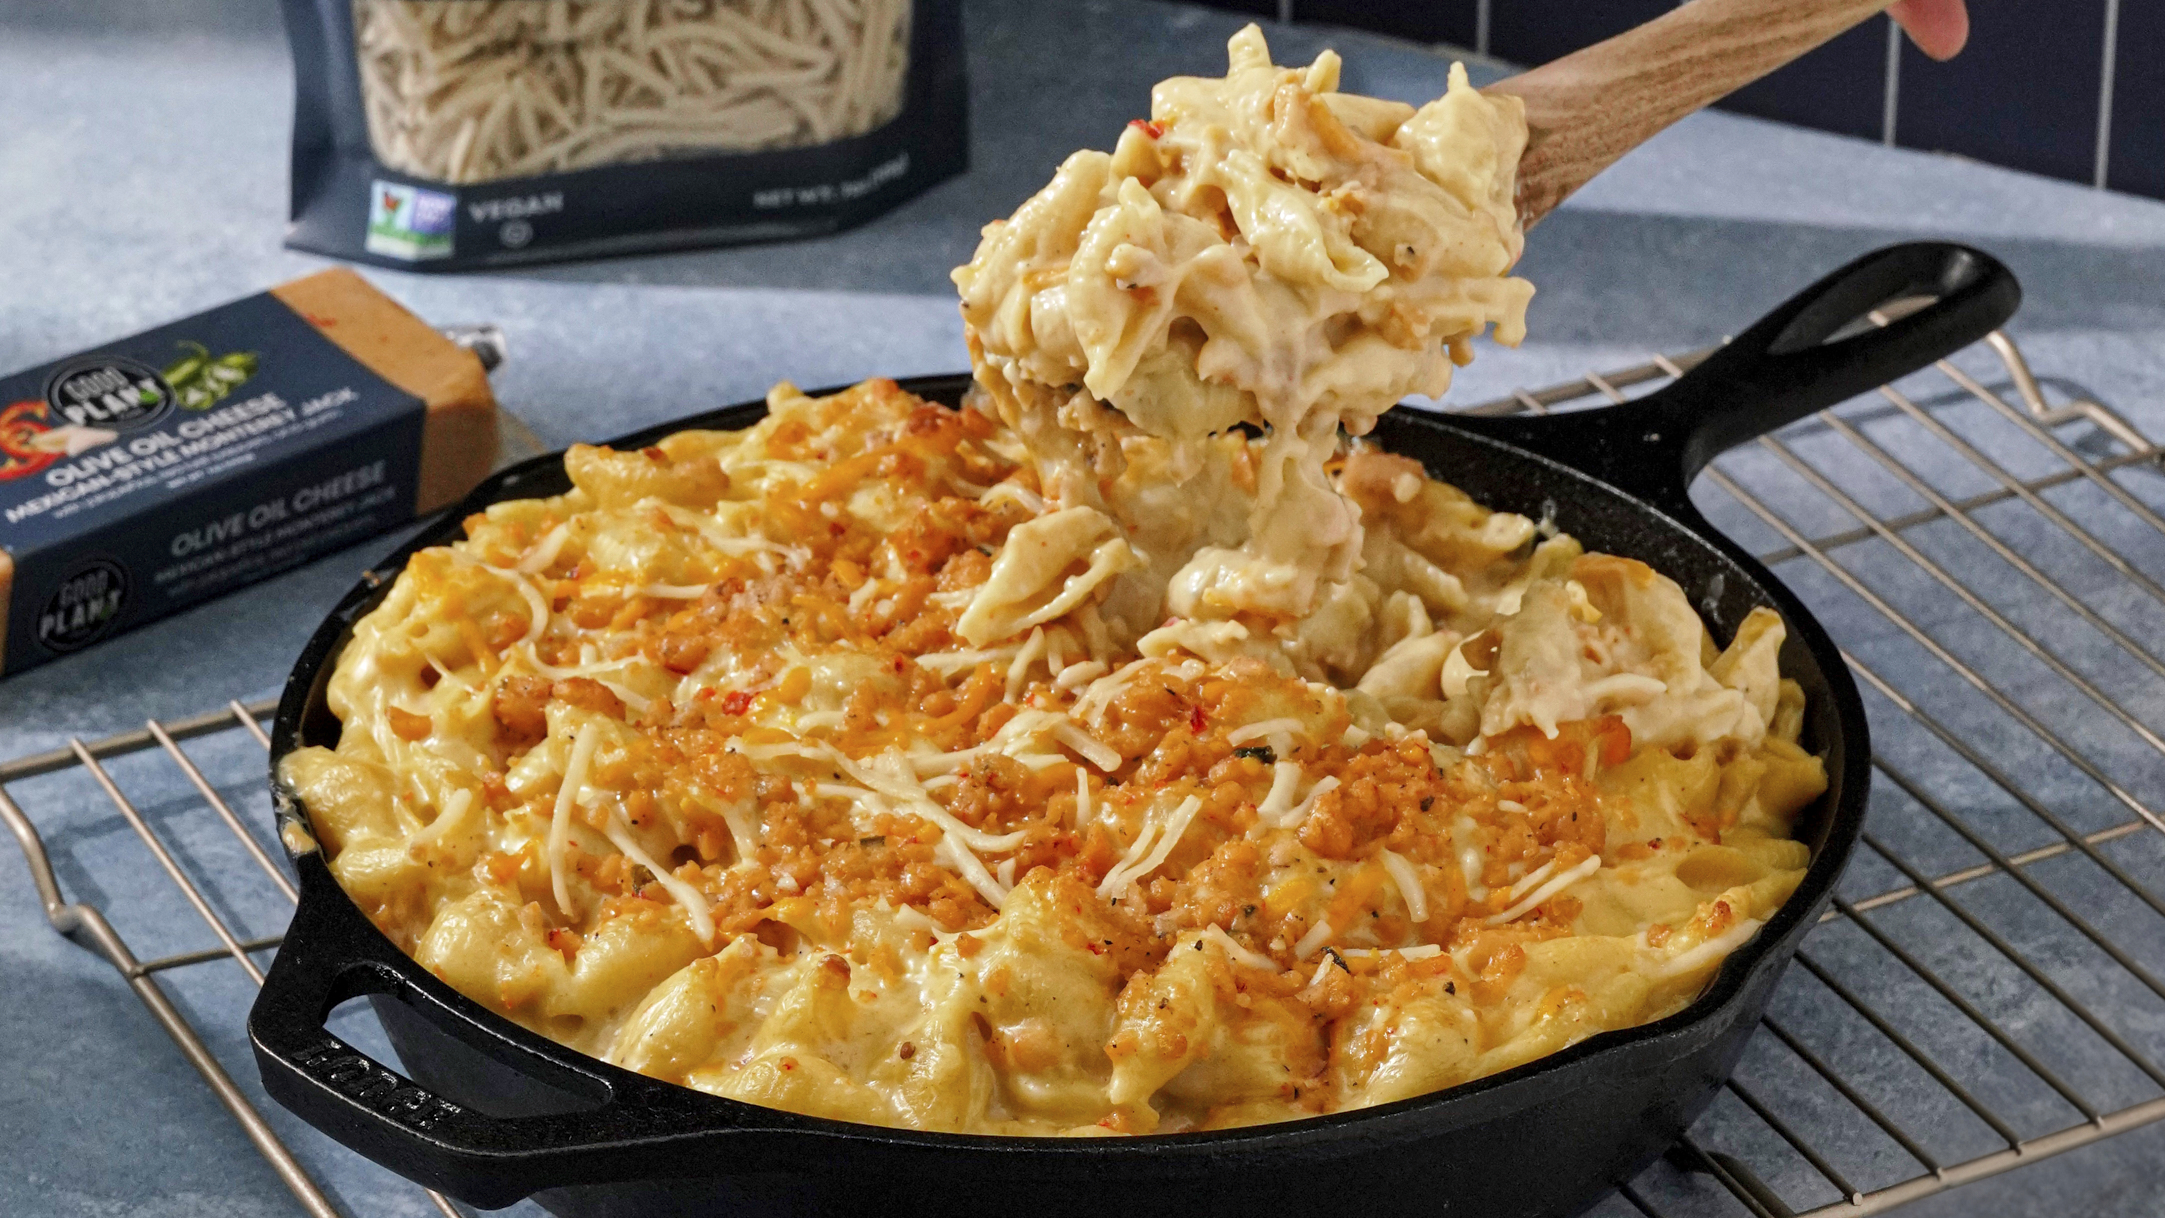 Gooey mac and cheese in cast iron pan made with GOOD PLANeT Foods Olive Oil Cheese